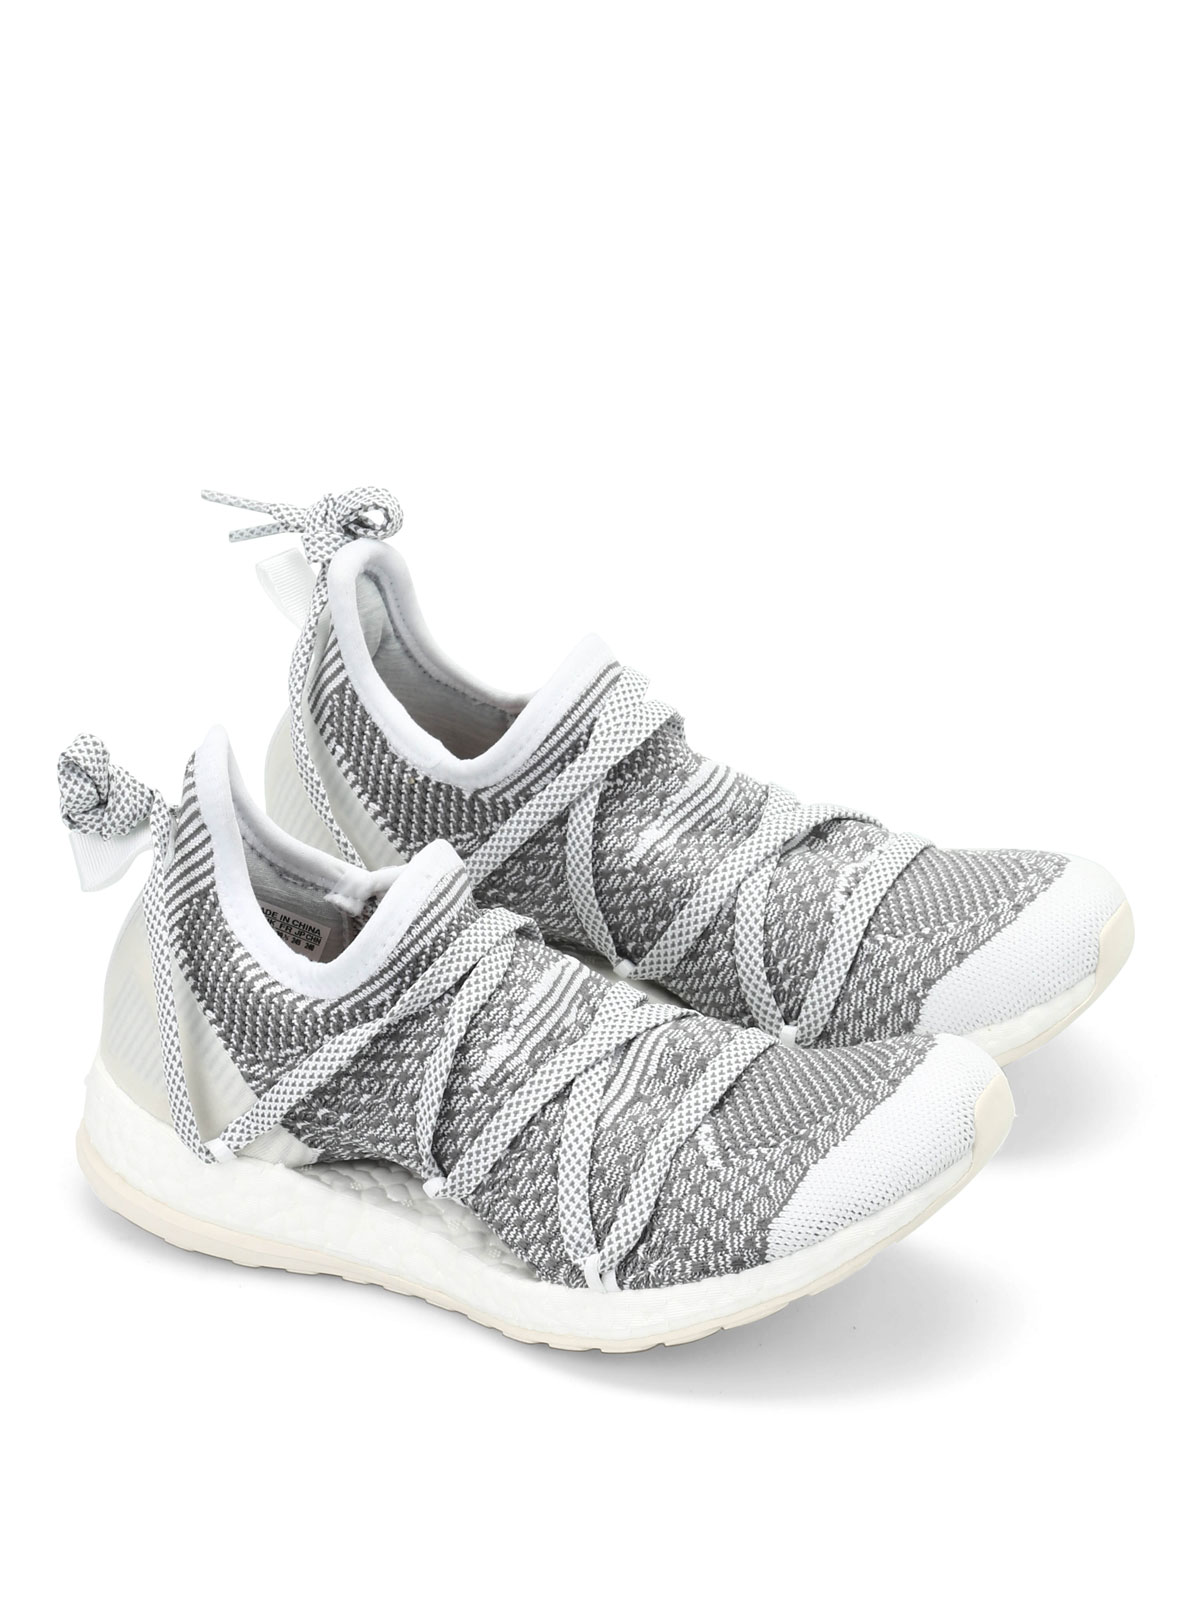 Trainers by McCartney - Pure Boost X - AF6431WHITEDKBLUEWHTVAP